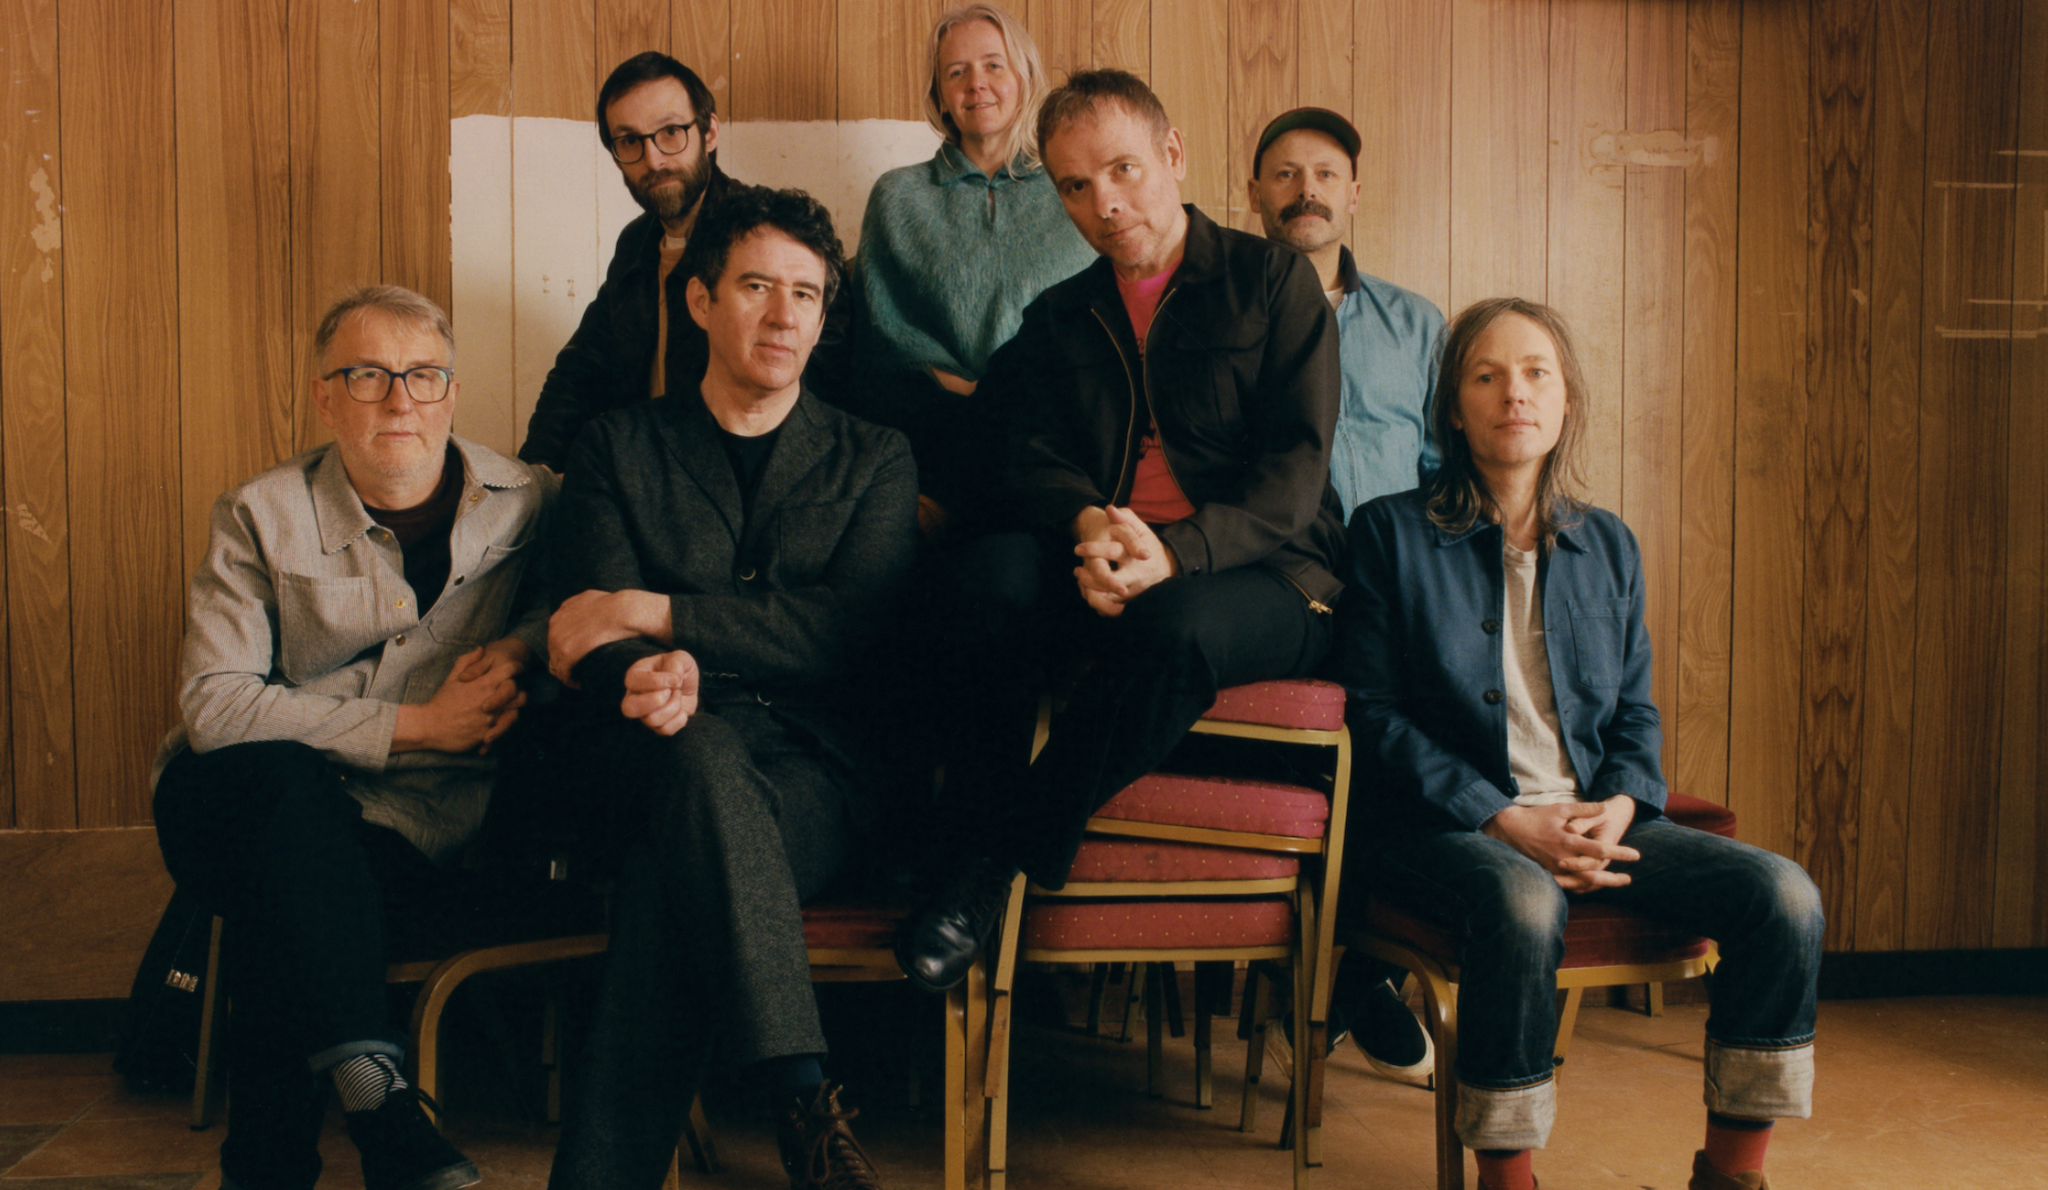 BELLE AND SEBASTIAN – A Bit Of Previous